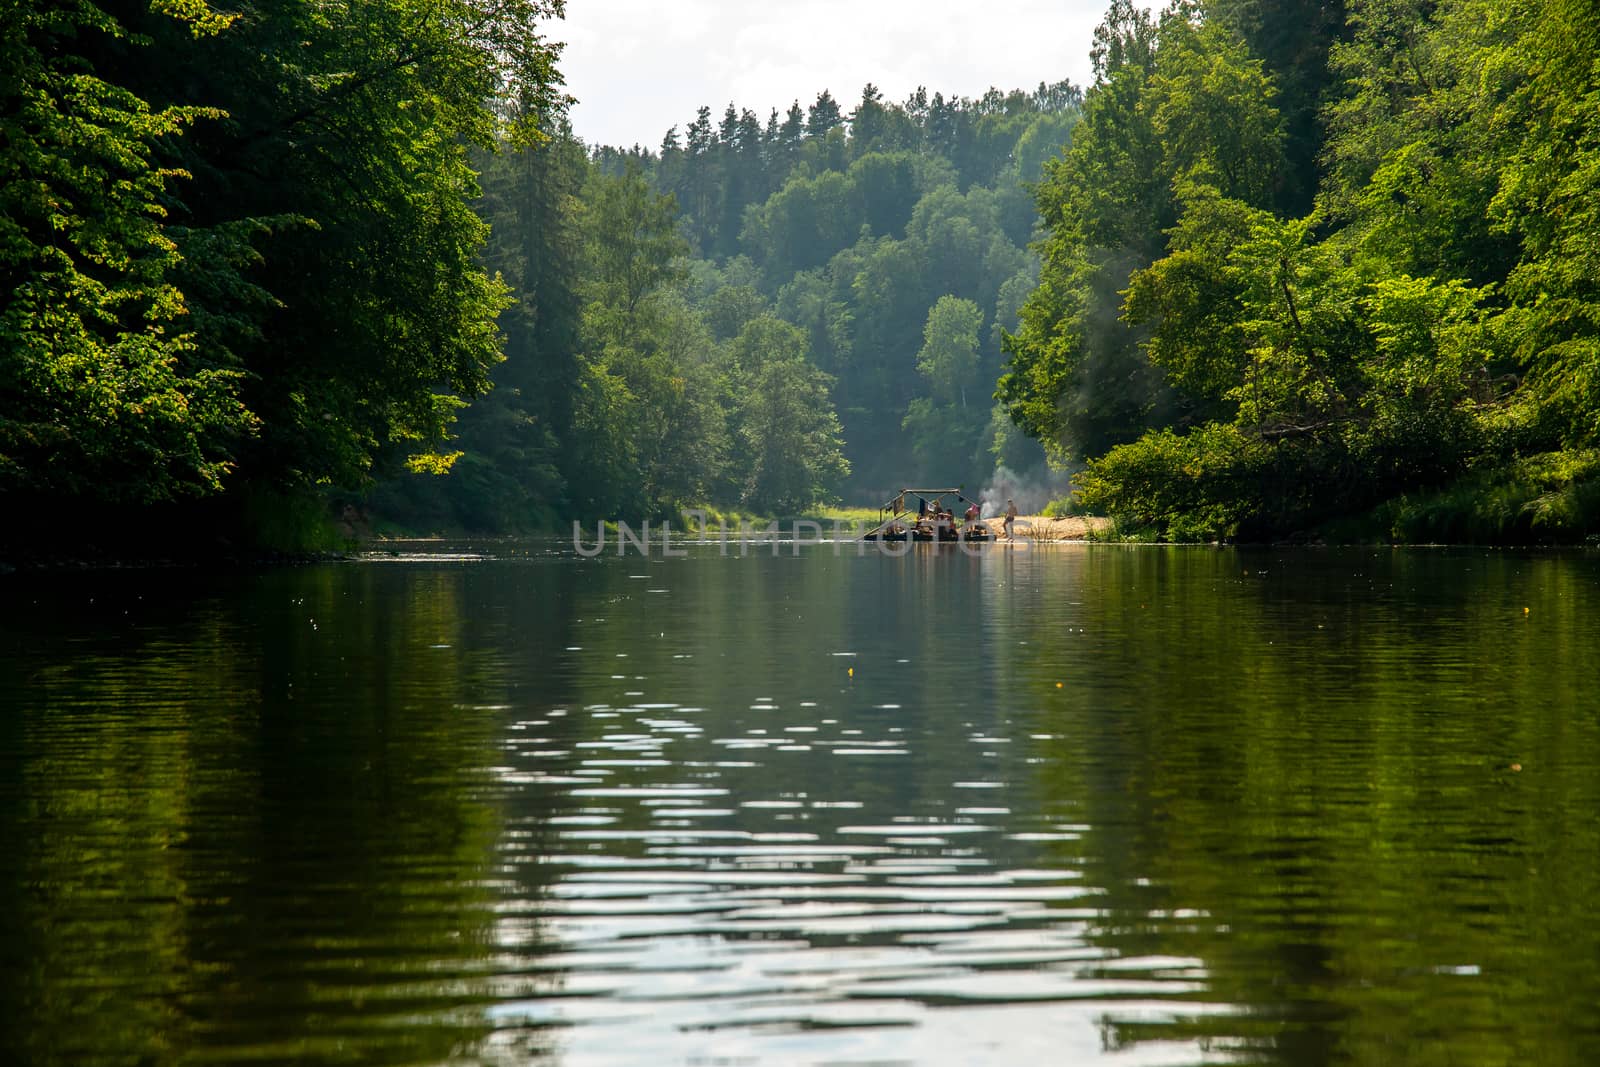 People boating on river Gauja in Latvia, peacefull nature scene. By raft through the river. Raft trip along the Gauja River in Latvia. The Gauja is the longest river in Latvia, which is located only in the territory of Latvia. Length - 452 km.



